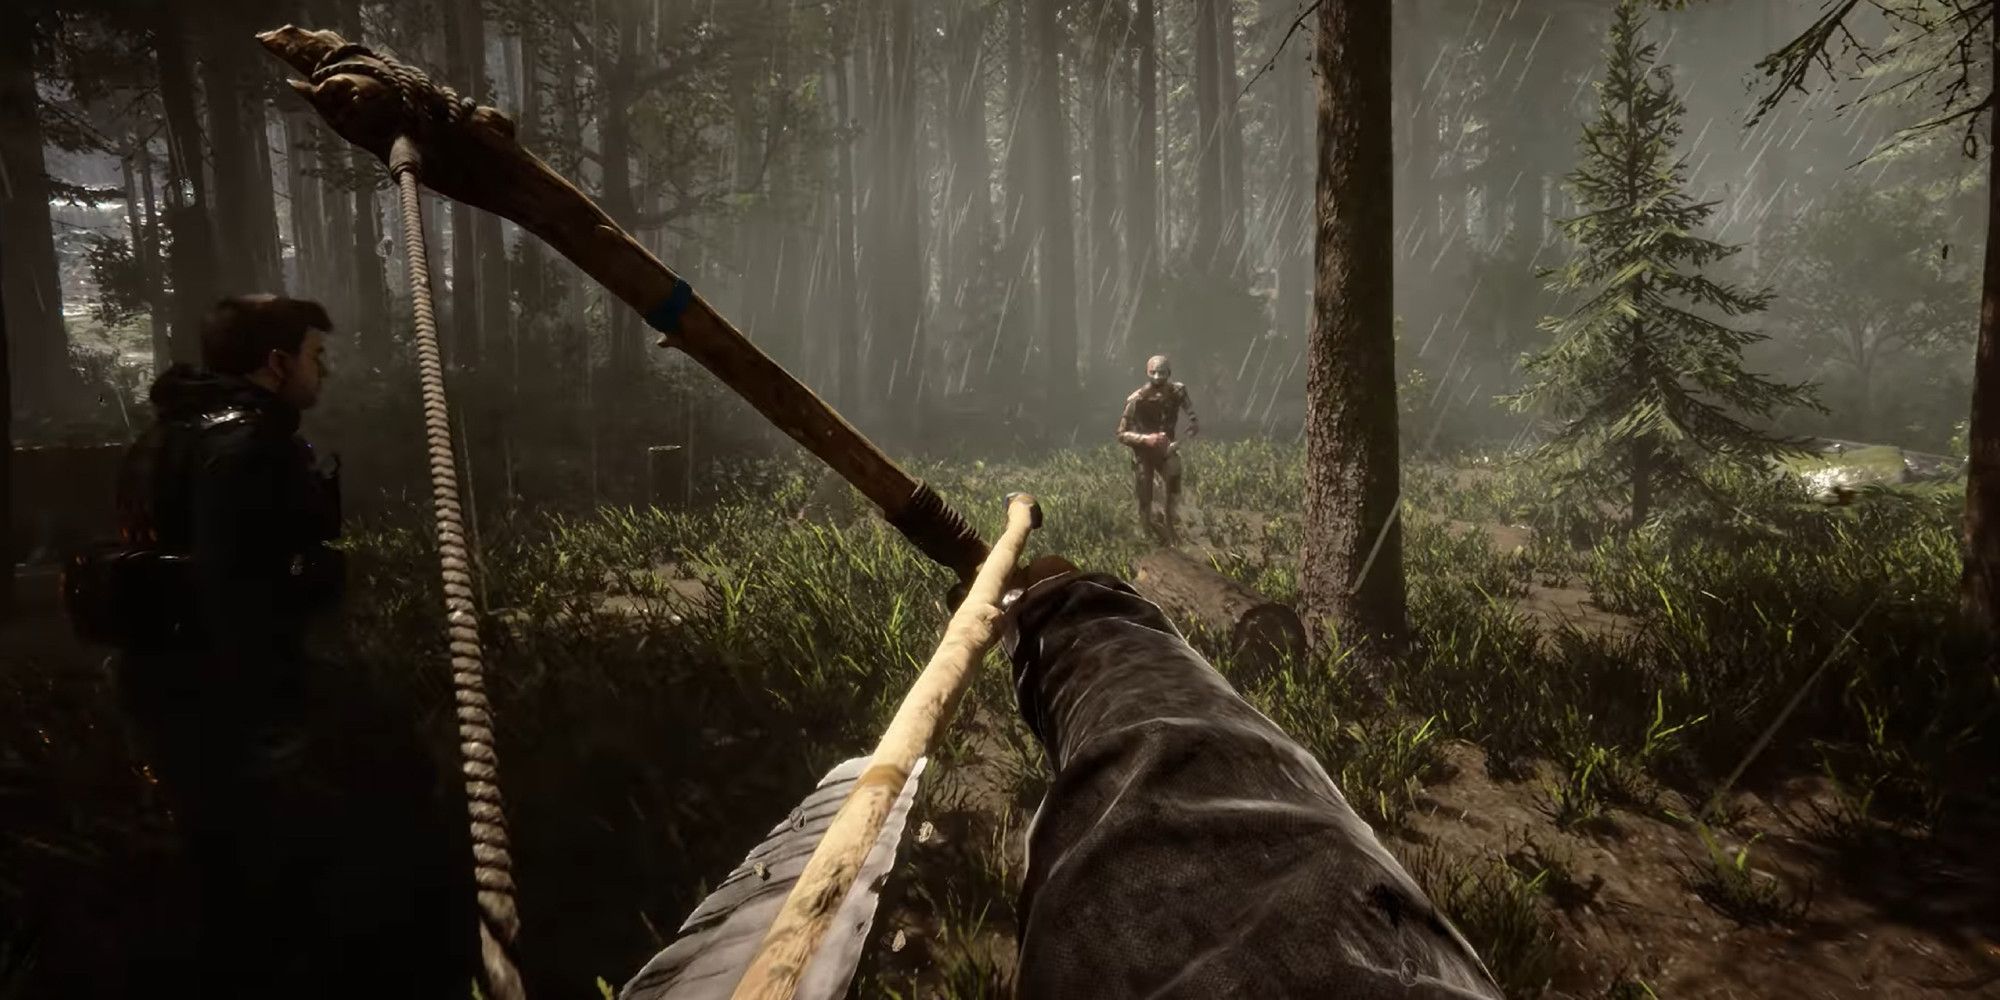 Sons of the Forest player aiming a bow at a cannibal